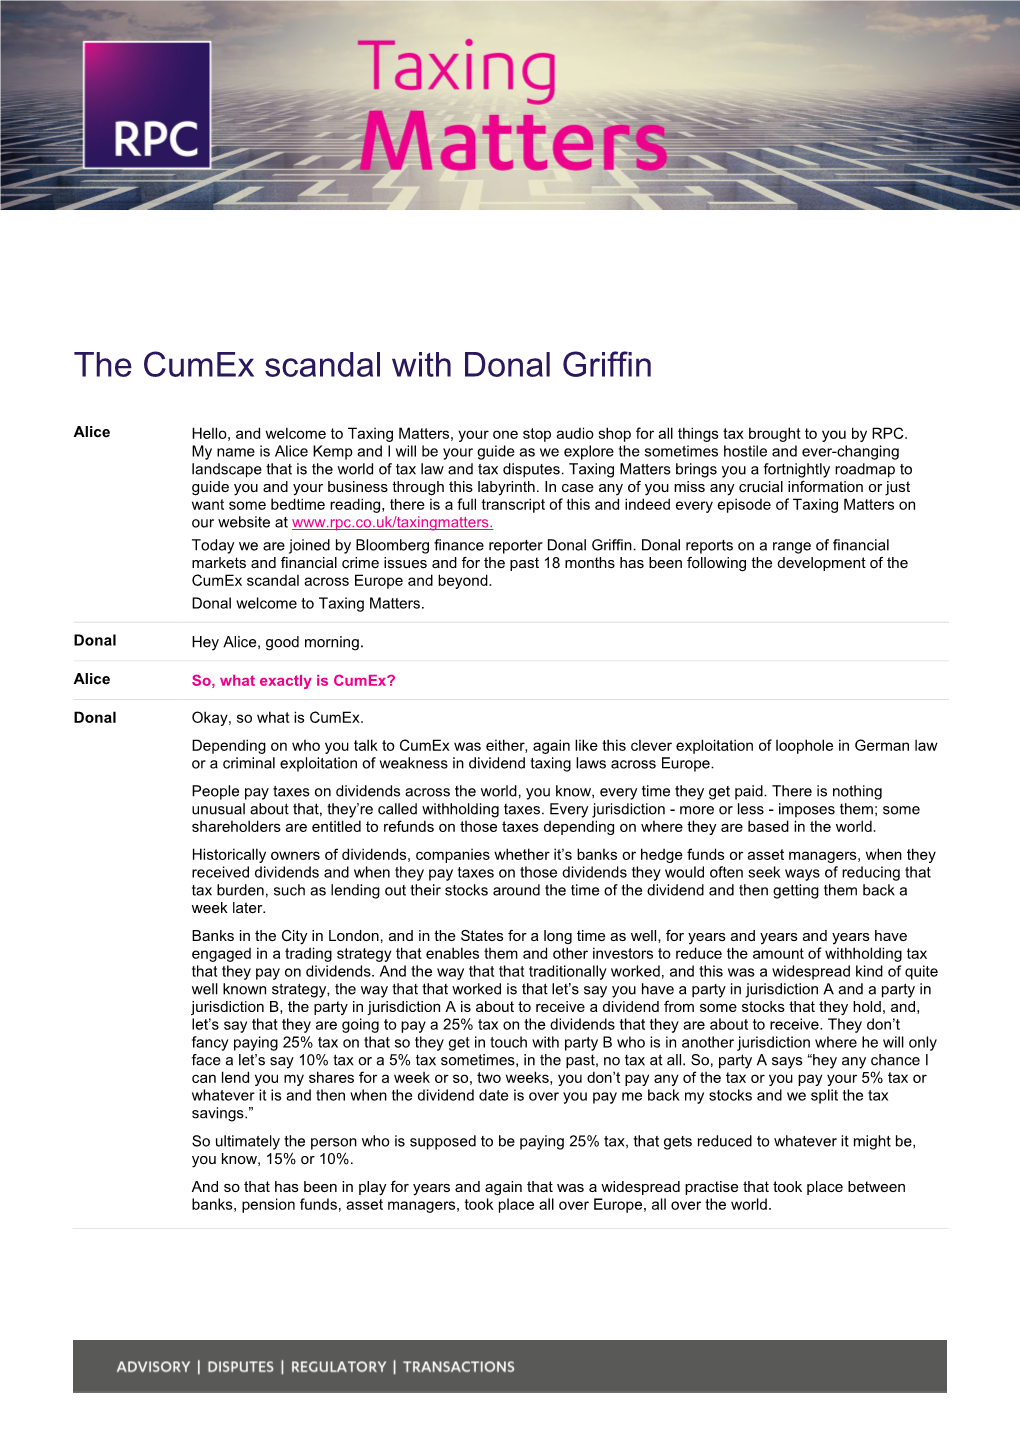 The Cumex Scandal with Donal Griffin